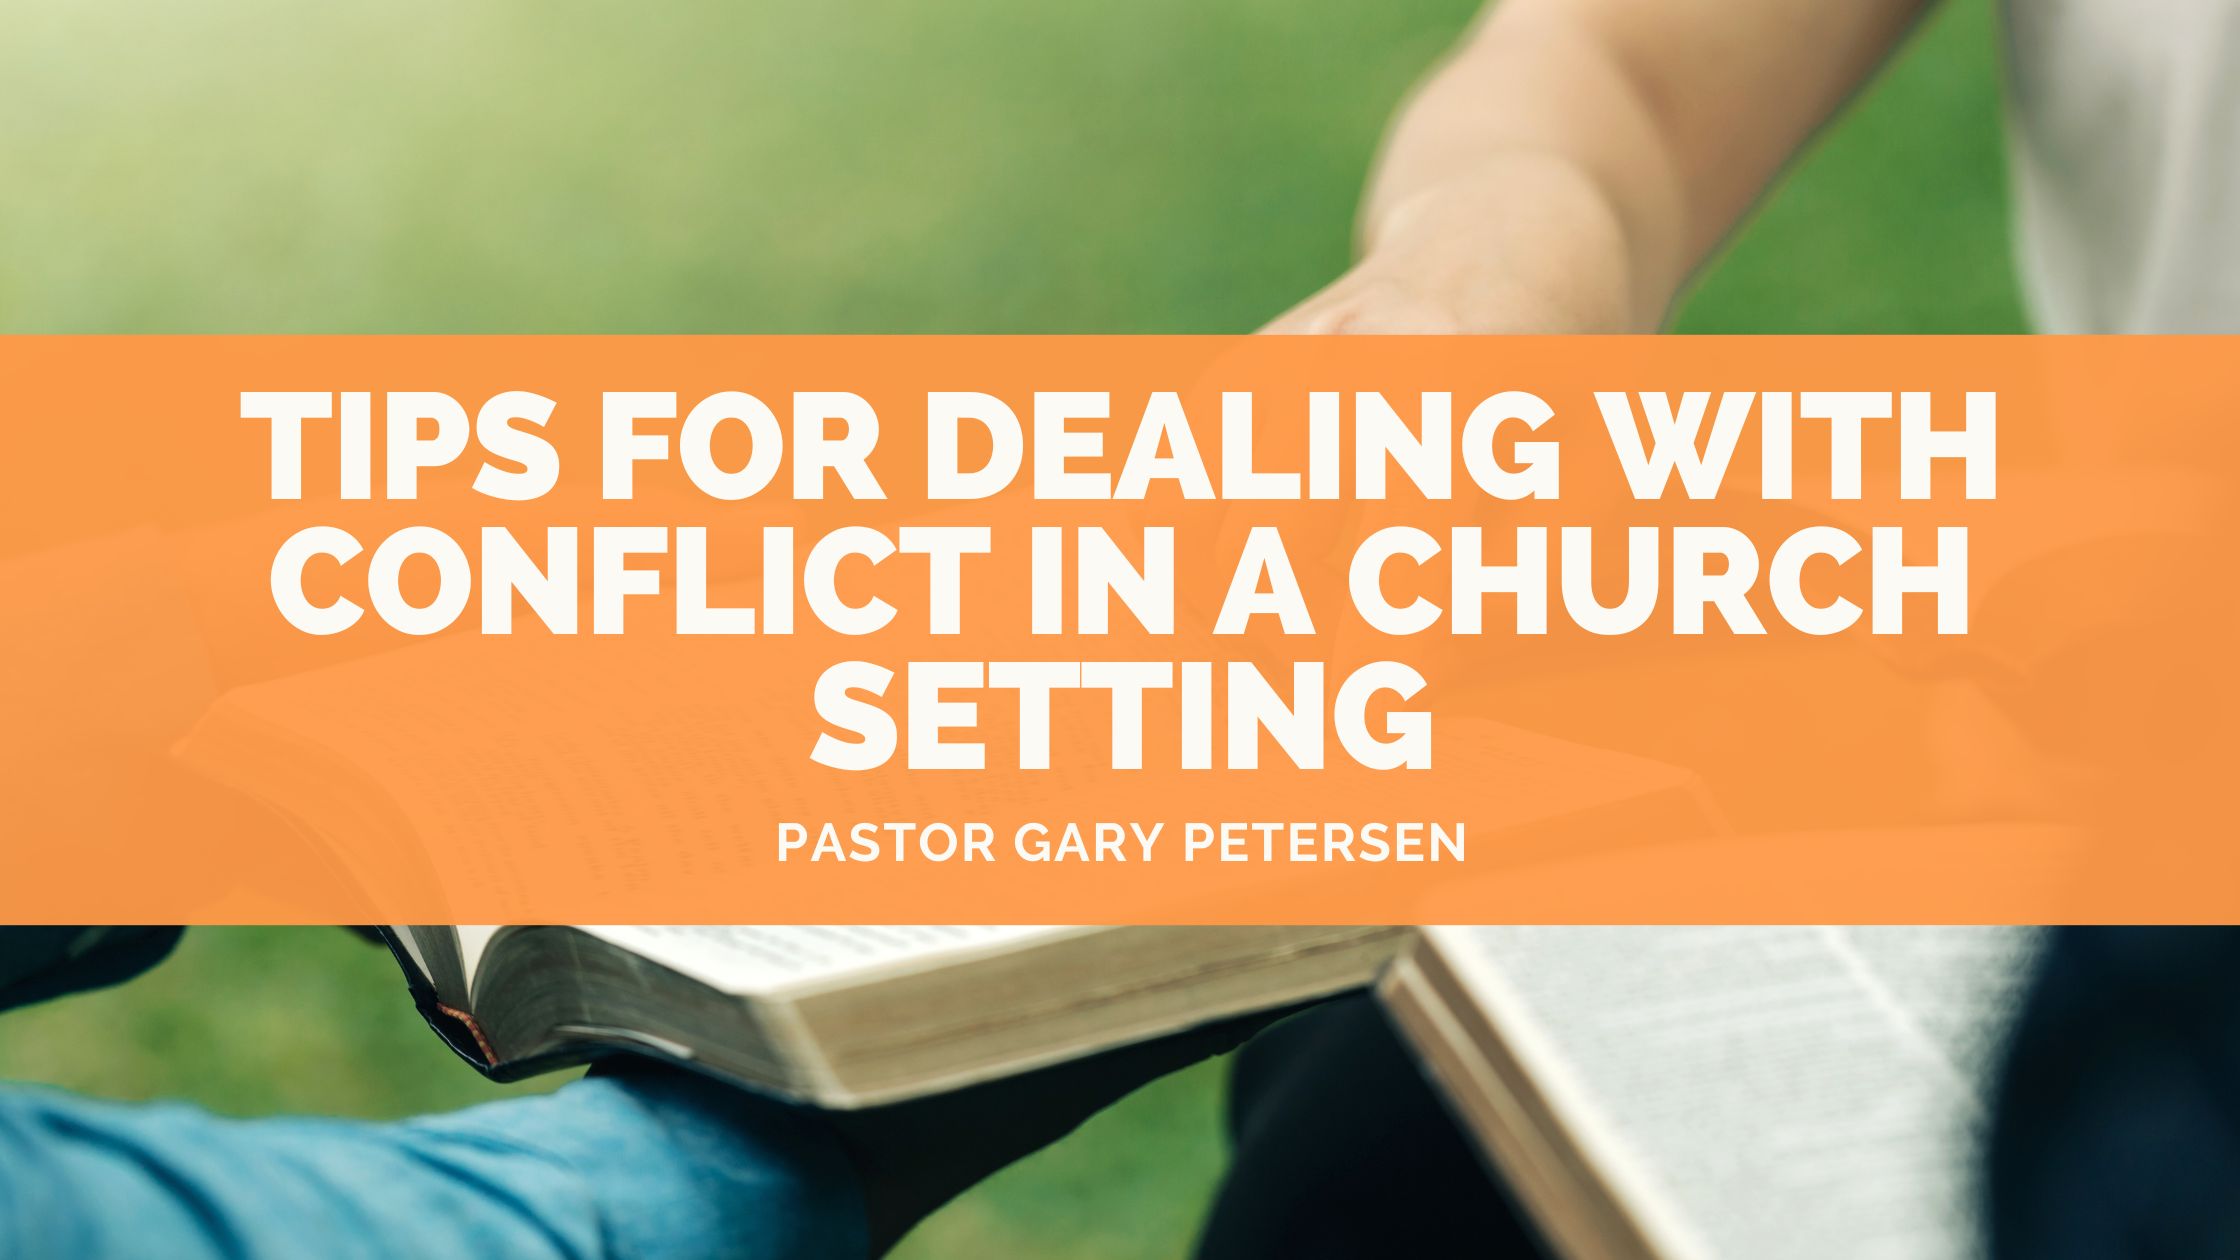 Tips for Dealing with Conflict in a Church Setting